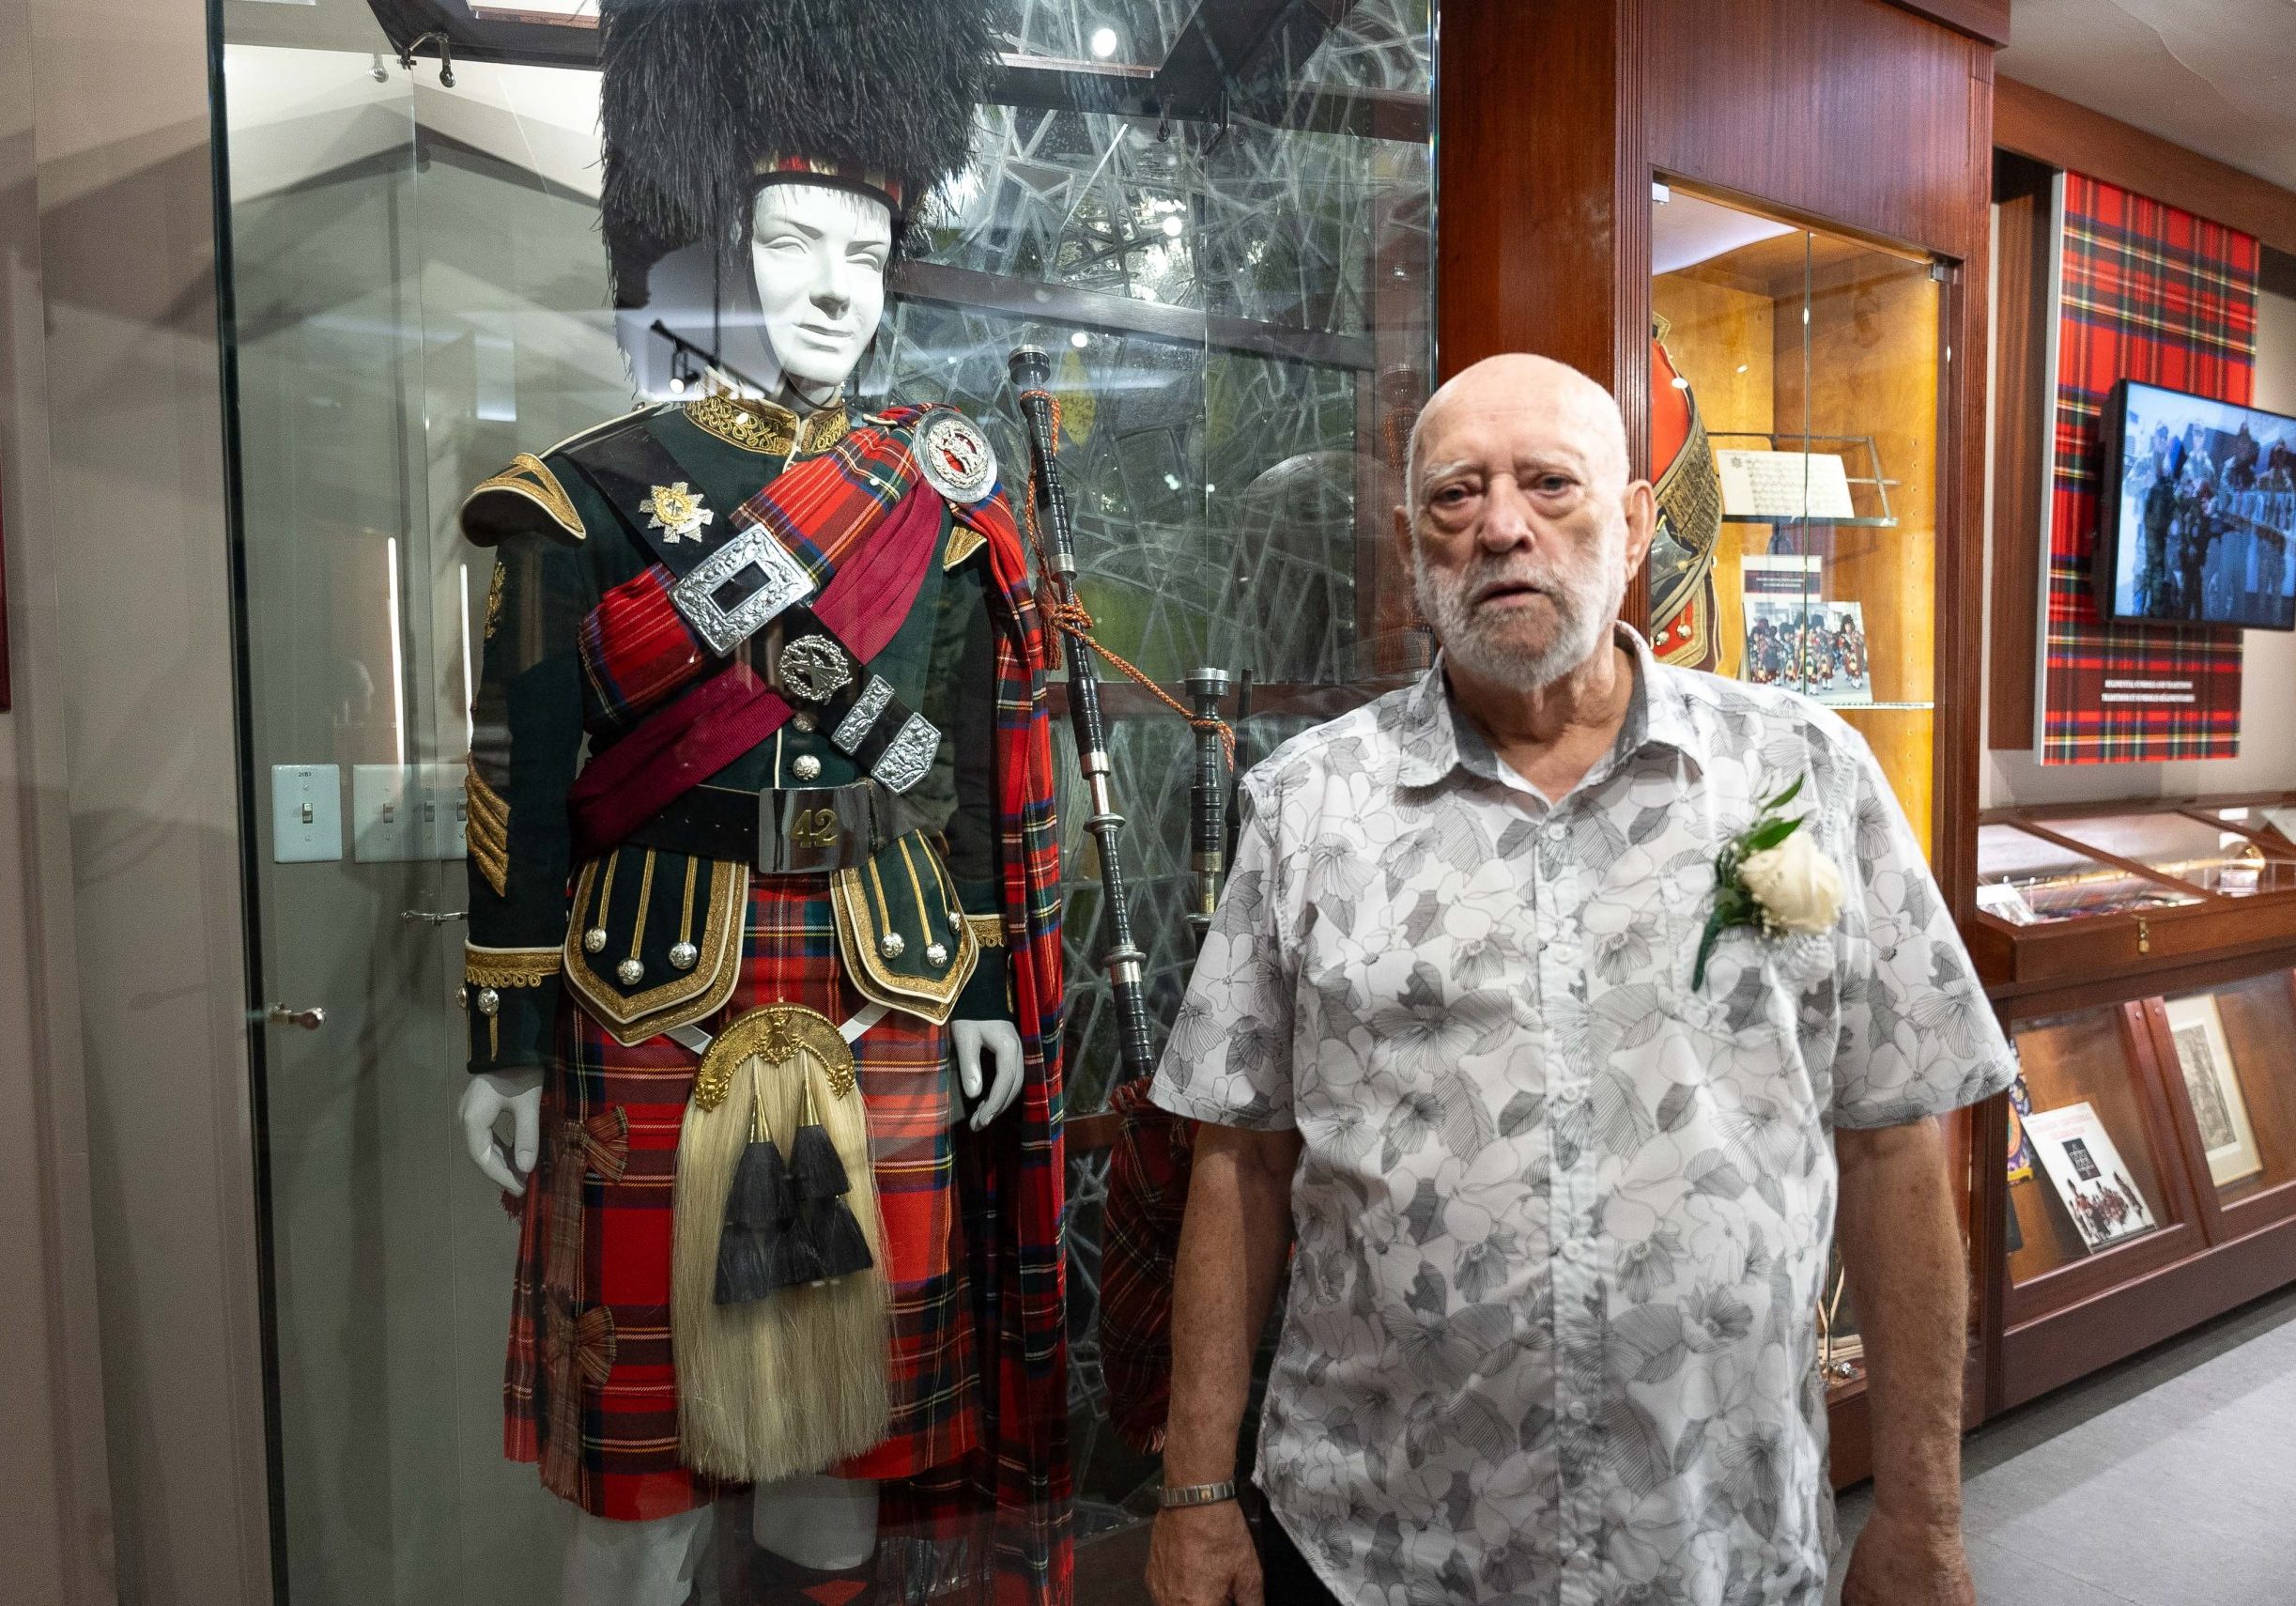 Raymond is posing in front of a display case that is showing the costume of Highland regiment